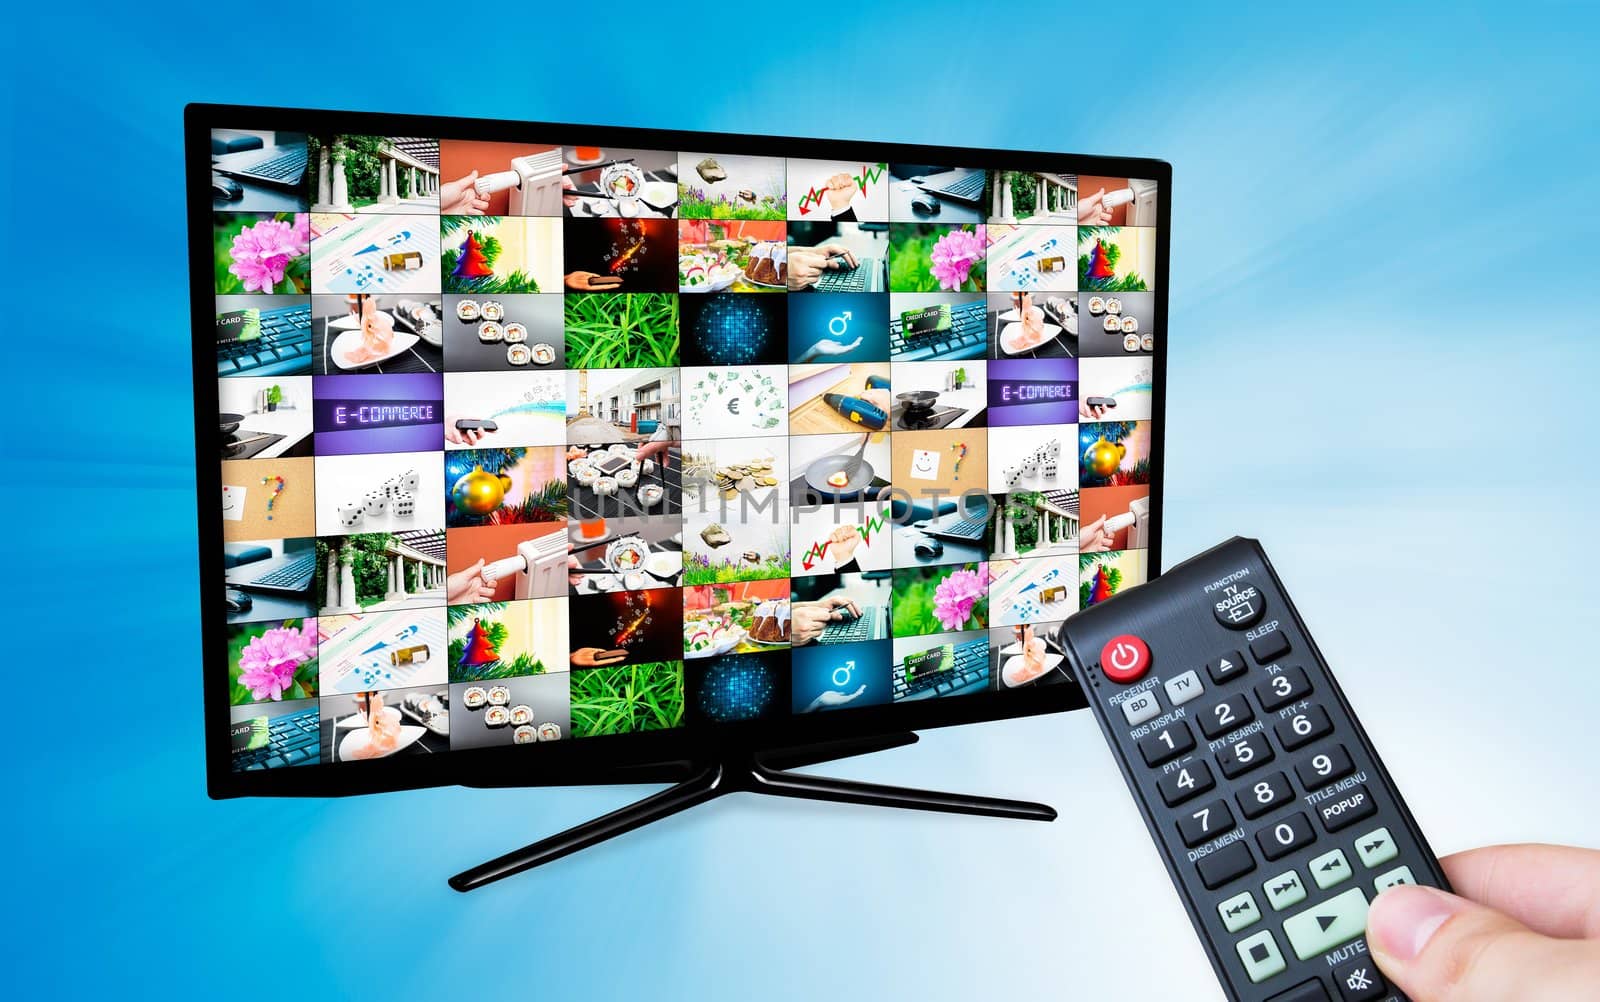 TV with multiple images gallery on blue background. Hand hold remote control